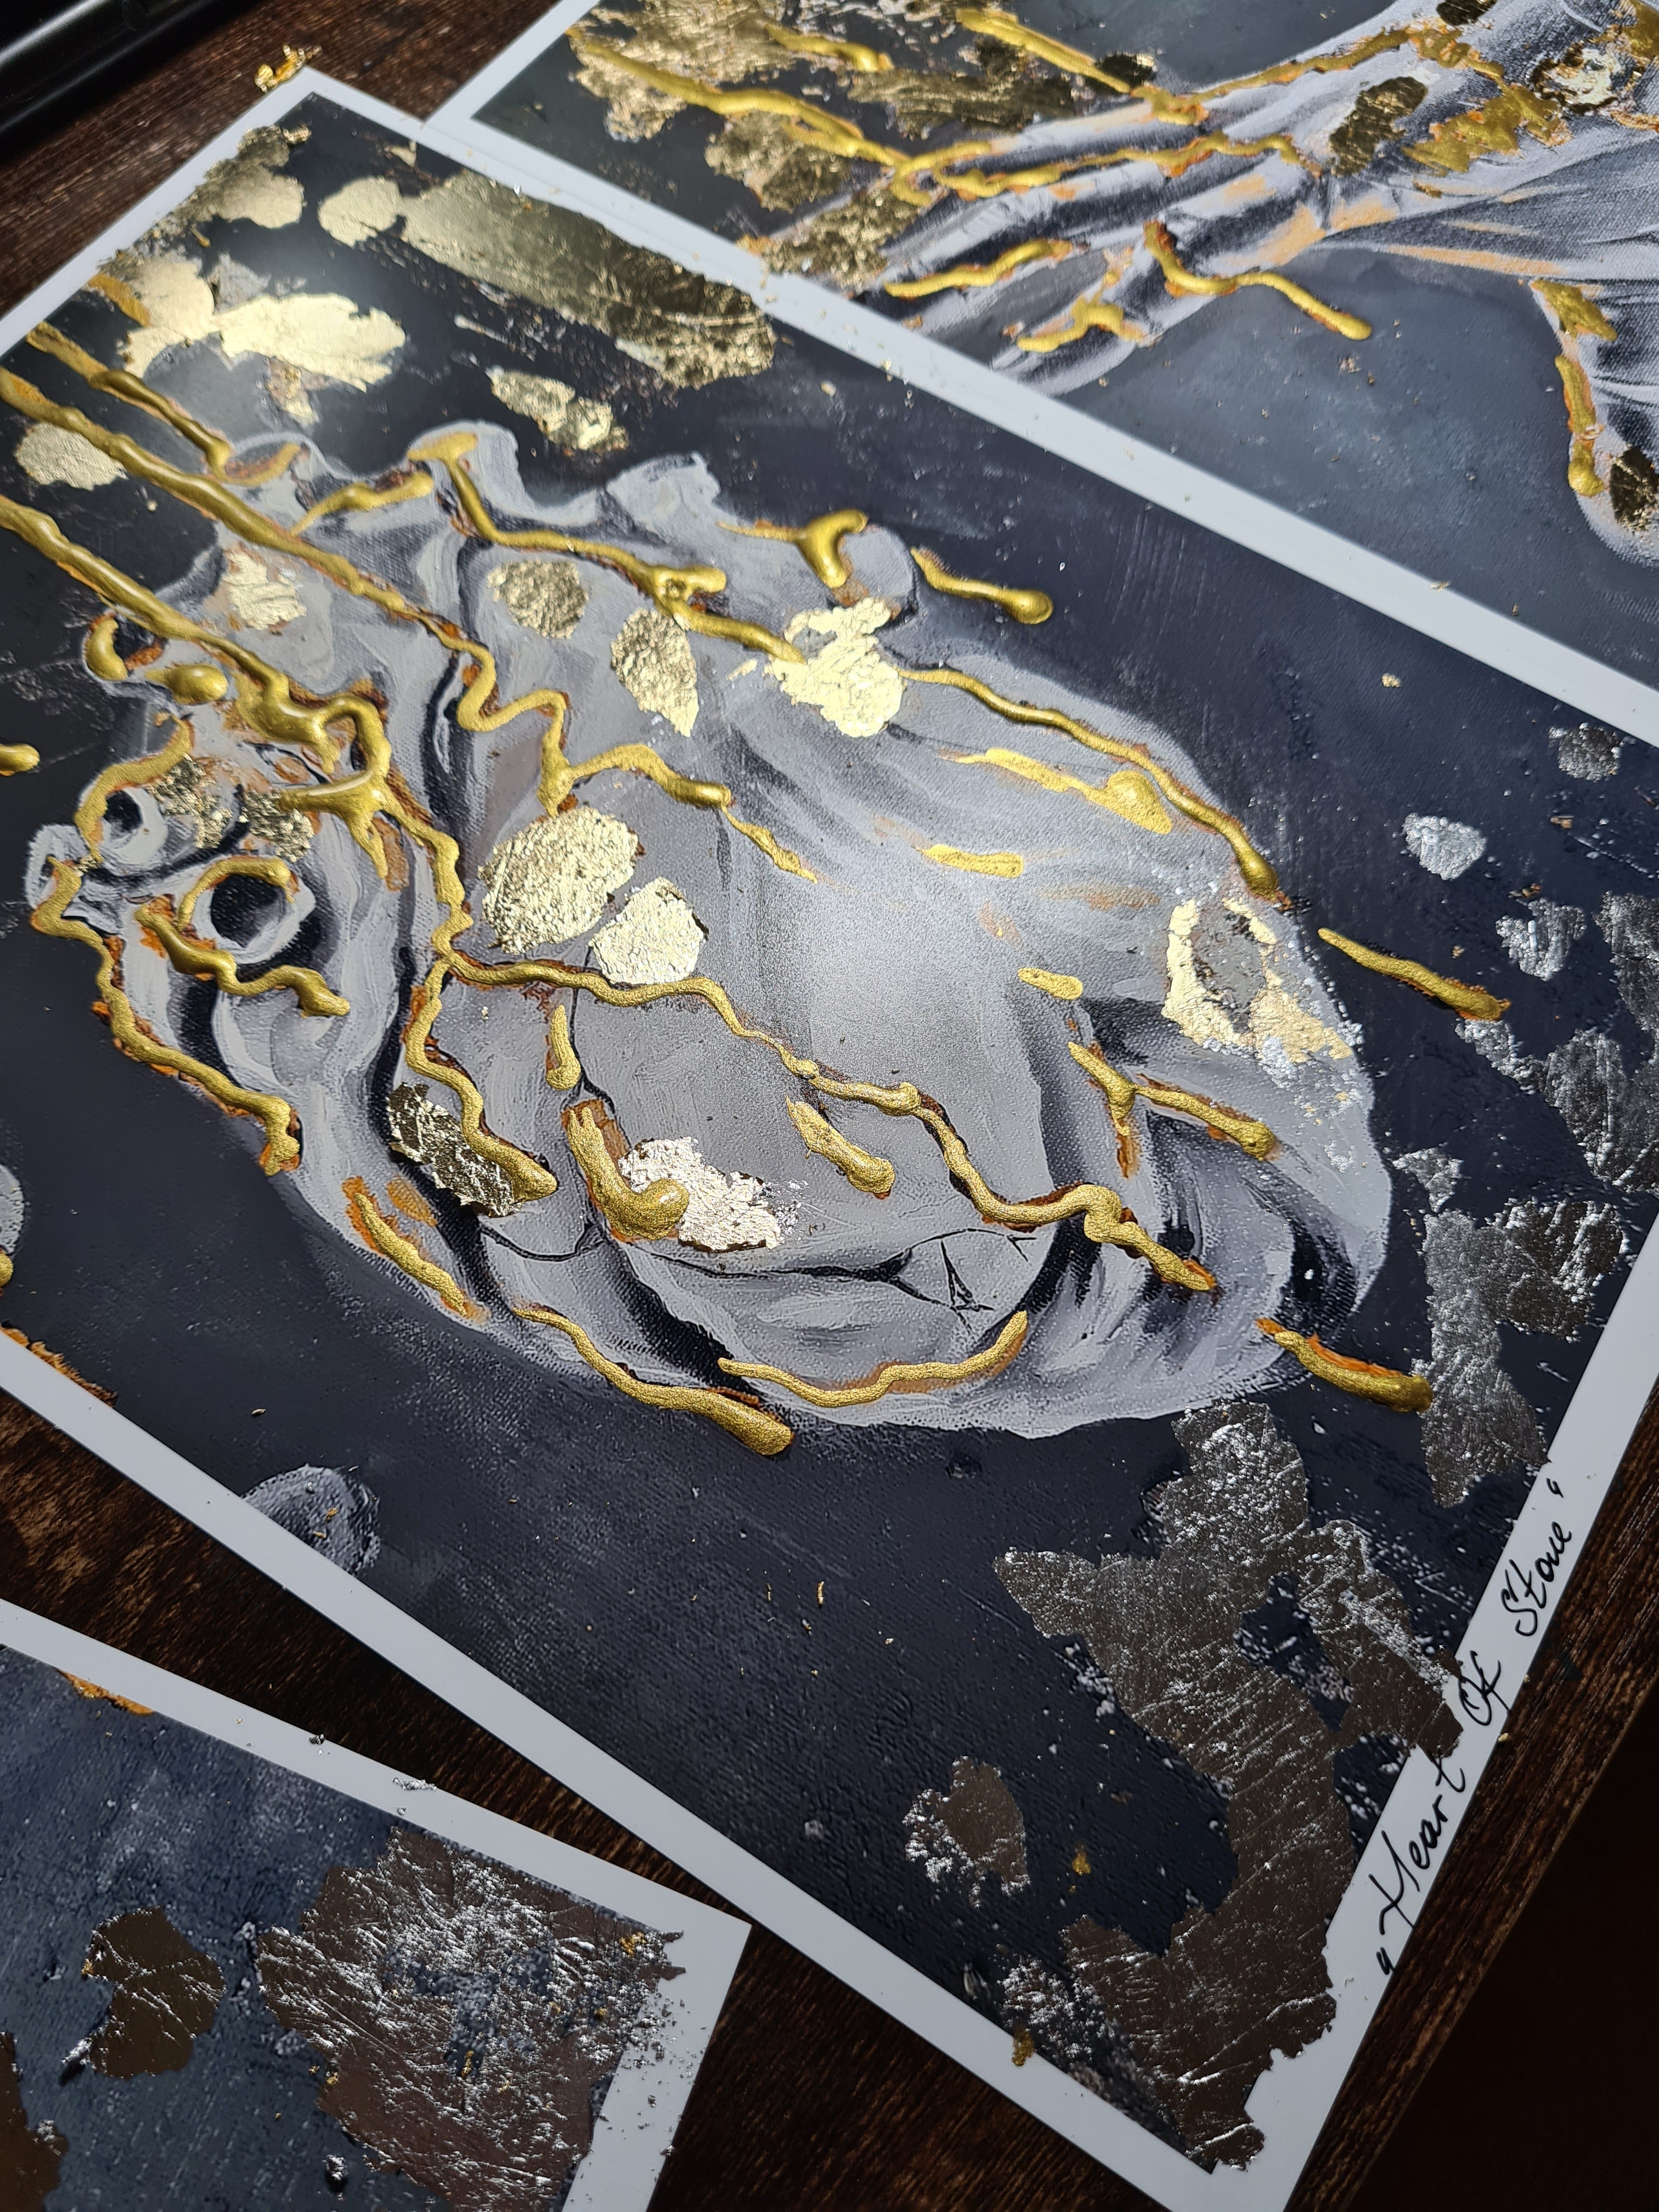 Art Print Set: Heart Of Stone, Embedded with gold leaf and ink